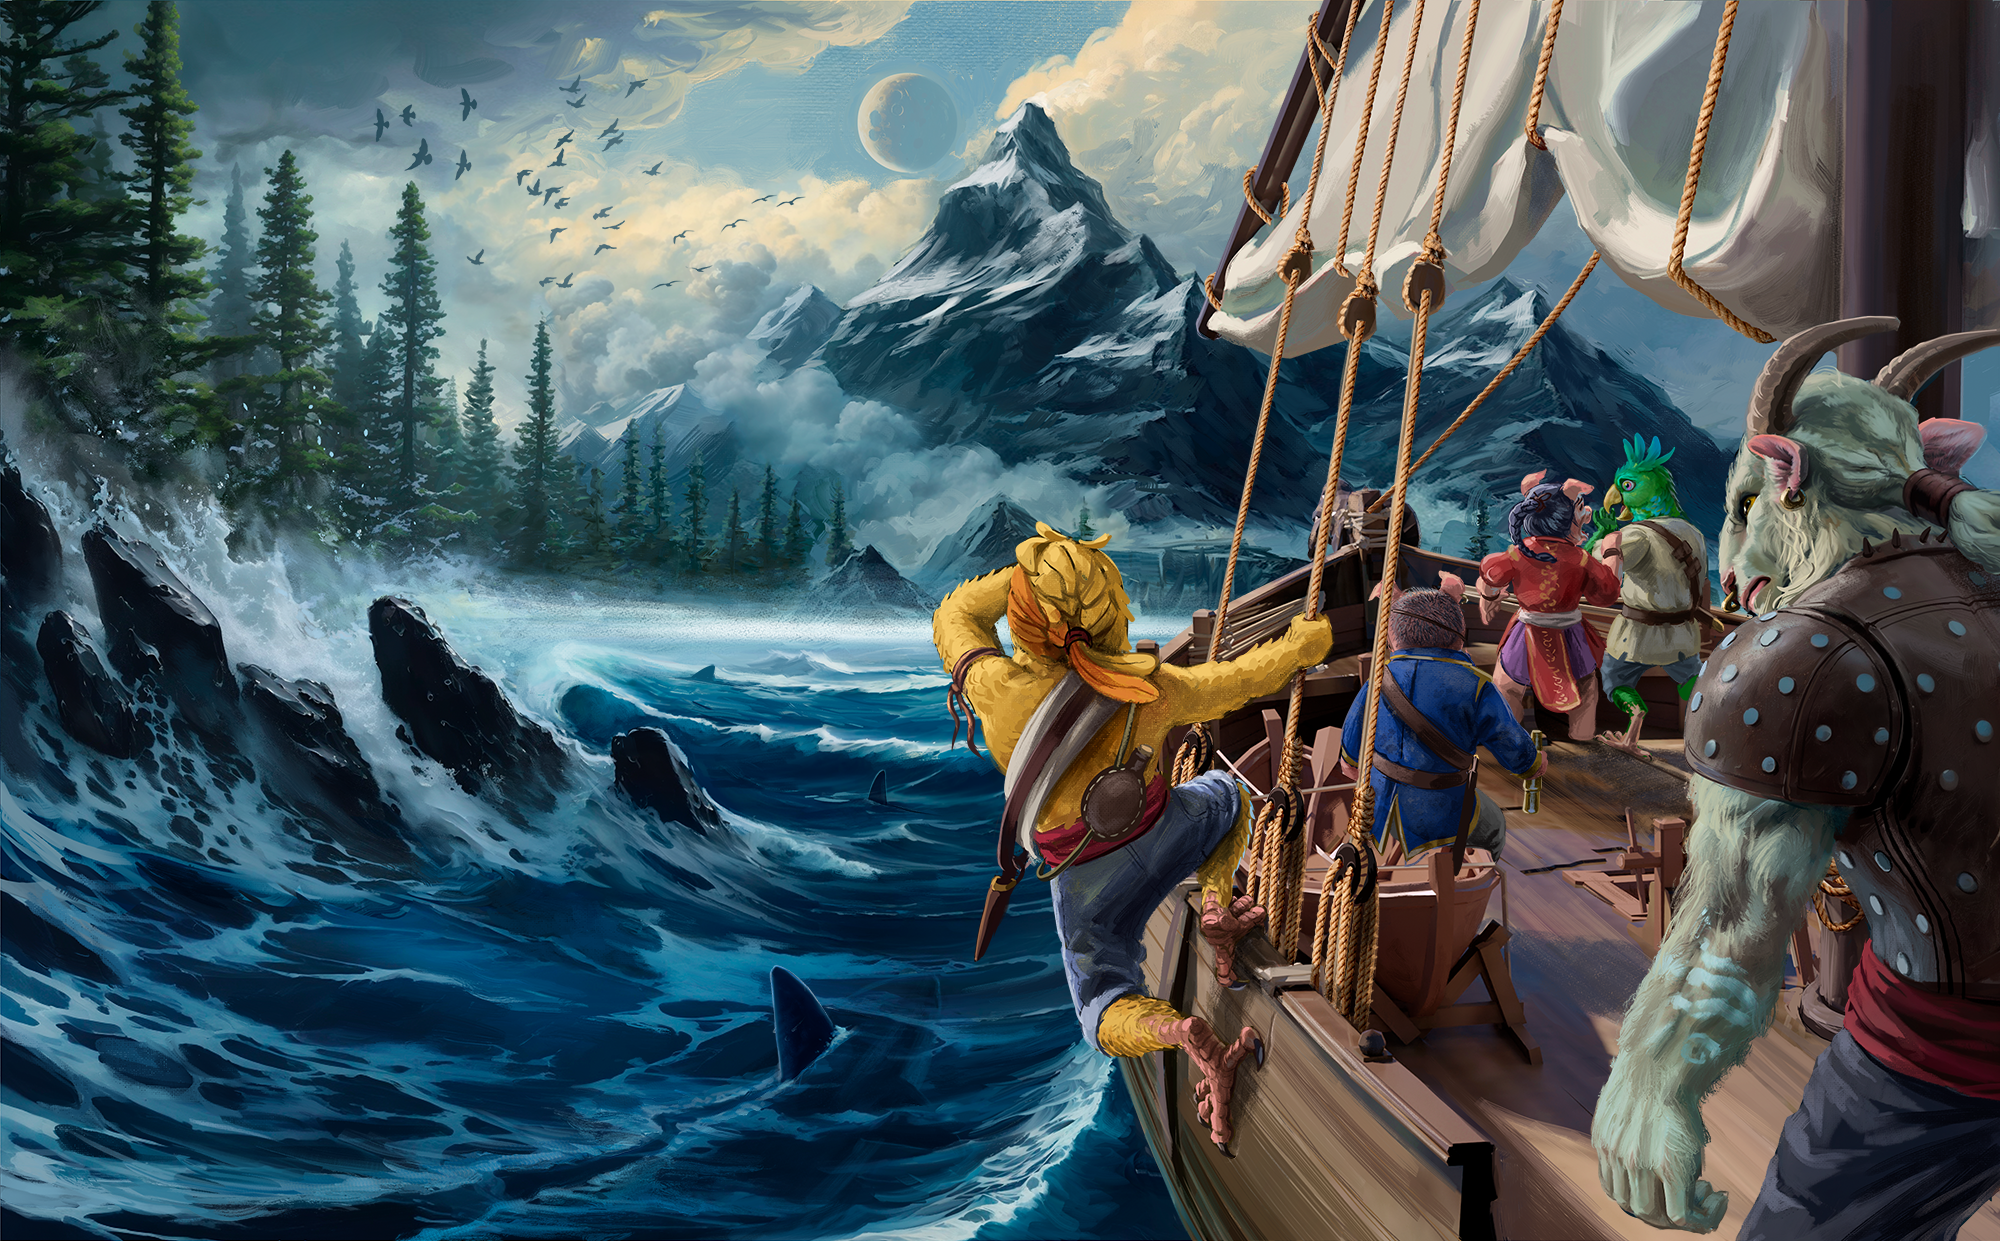 Moonshadow Isle illustration by  Luis Salas Lastra: A crew of sailors sale close to the rocky shore of a forested isle